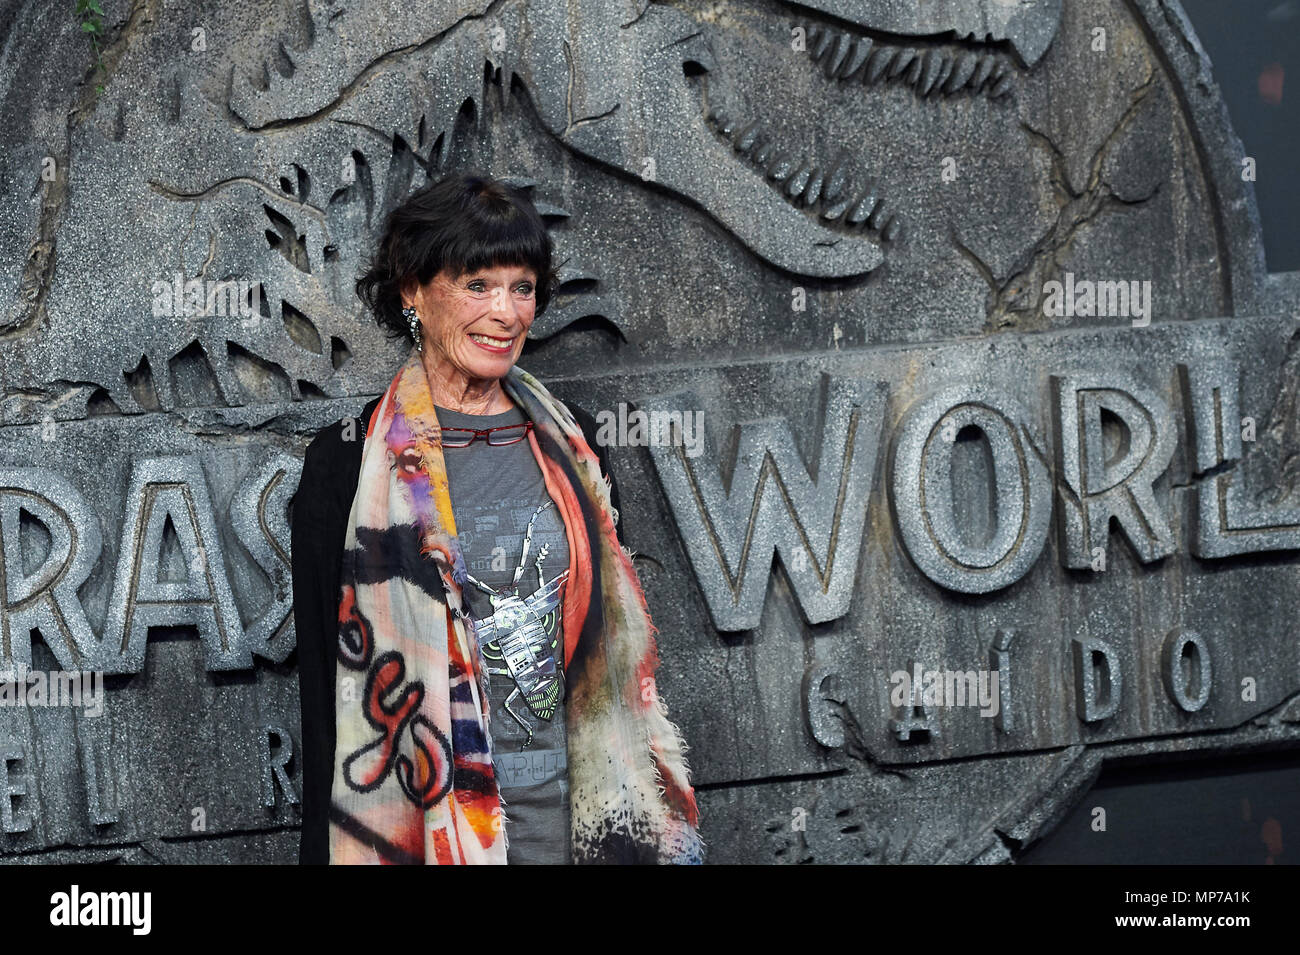 Madrid, Spain. 21st May, 2018. Geraldine Chaplin attends 'Jurassic World: Fallen Kingdom' World Premiere at WiZink Center on May 21, 2018 in Madrid, Spain. May21, 2018. Credit: Jimmy Olsen/Media Punch ***No Spain***/Alamy Live News Stock Photo